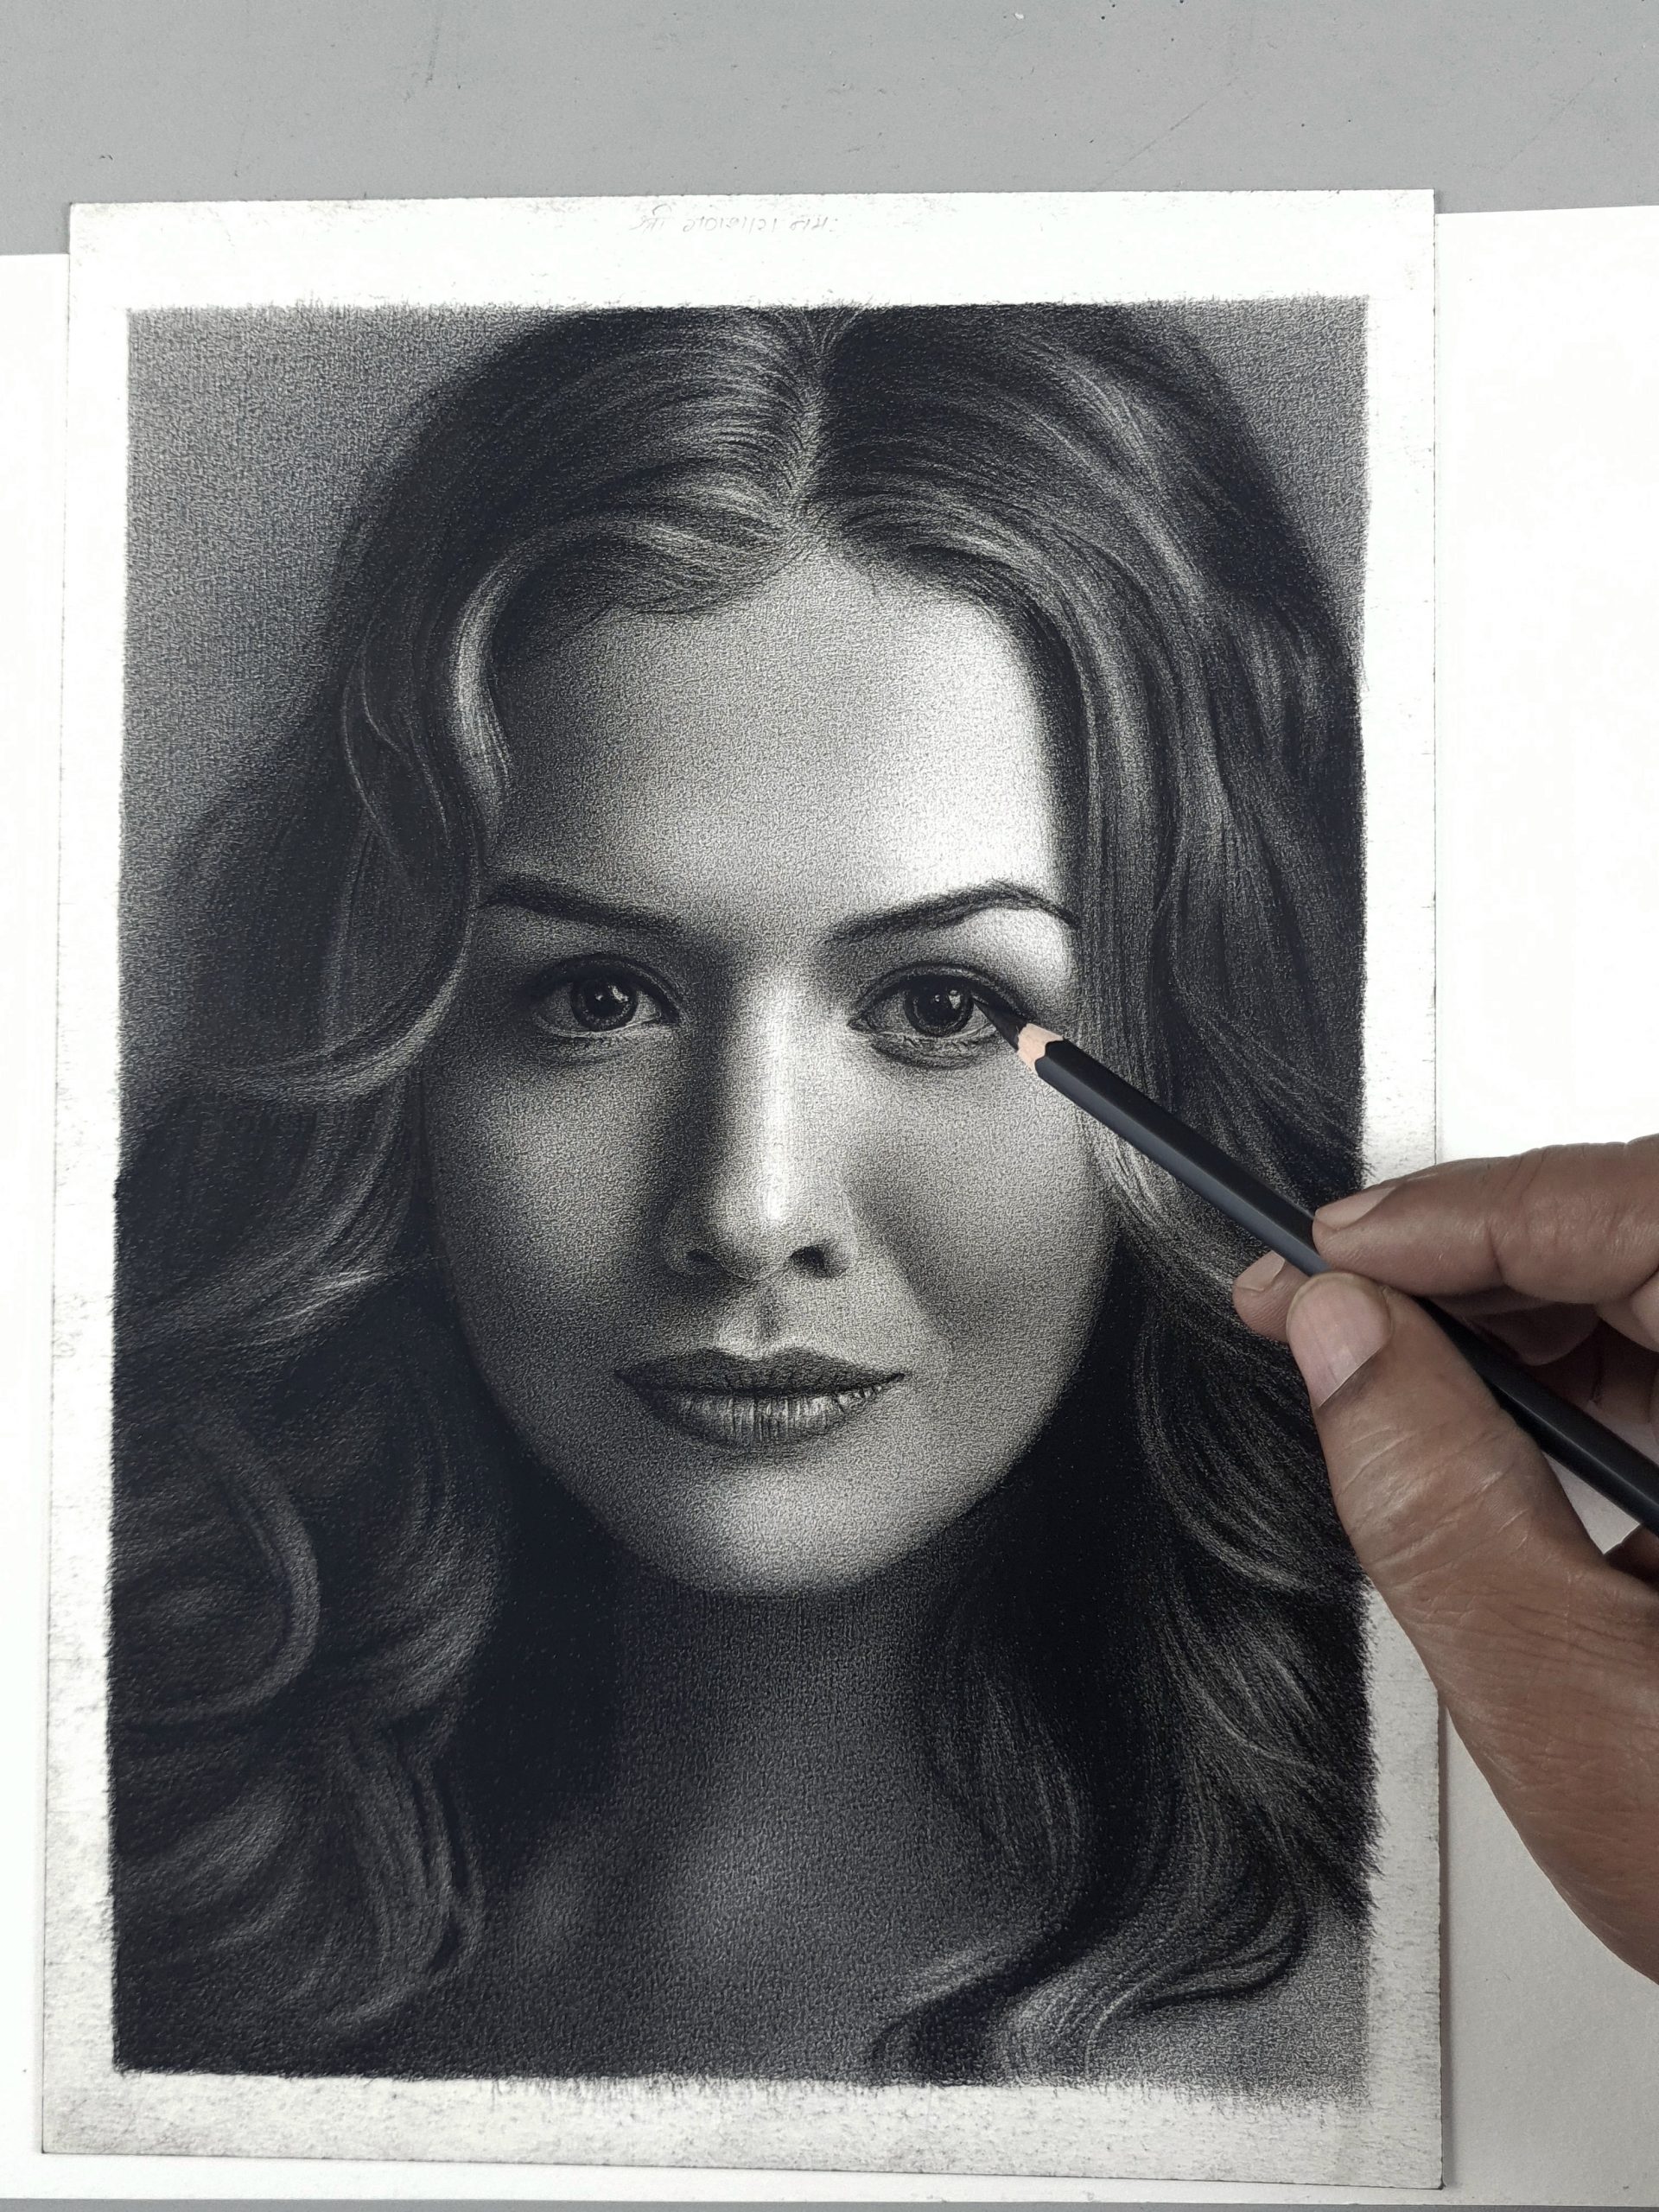 Learn to Sketch Better Portraits With Just 3 Simple Tips  Craftsy   wwwcraftsycom